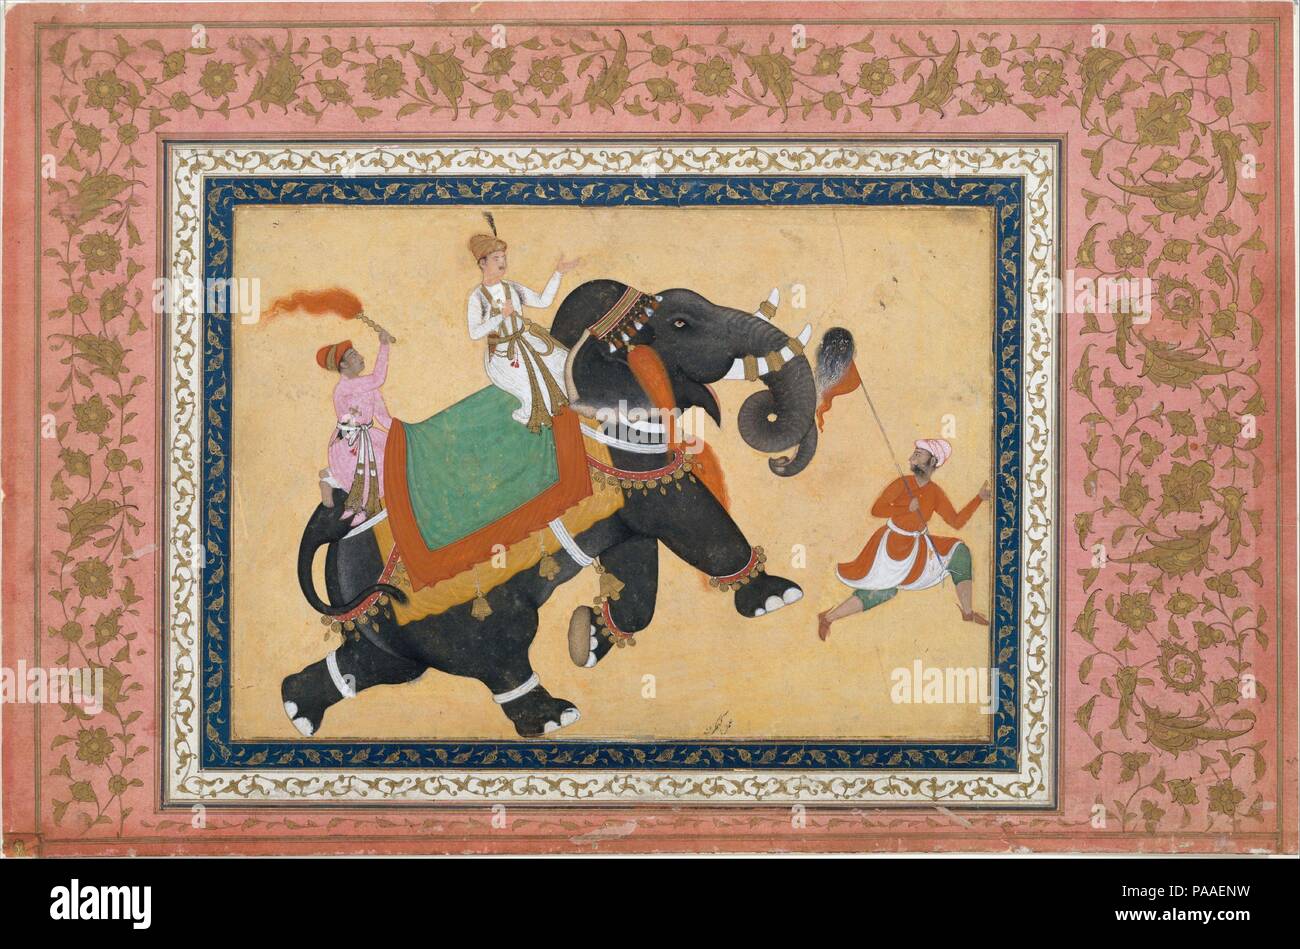 Prince Riding an Elephant. Artist: Painting by Khem Karan. Dimensions: Page: H. 12 1/4 in. (31.1 cm)  W. 18 1/2 in. (47 cm)  Painting: H. 7 3/4 in. (19.7 cm)  W. 10 3/4 in. (27.3 cm)  Mat: H. 19 1/4 in. (48.9 cm)   W. 14 1/4 in. (36.2 cm). Date: 16th-17th century.  Elephants were highly prized at Indian courts, greatly appreciated as gifts, and eagerly sought as booty in military campaigns. Paintings of several admired elephants were made at the Mughal court, much as portraits were made of courtiers and nobles. Khem Karan, whose signature appears at the bottom of the picture, was a well-known  Stock Photo